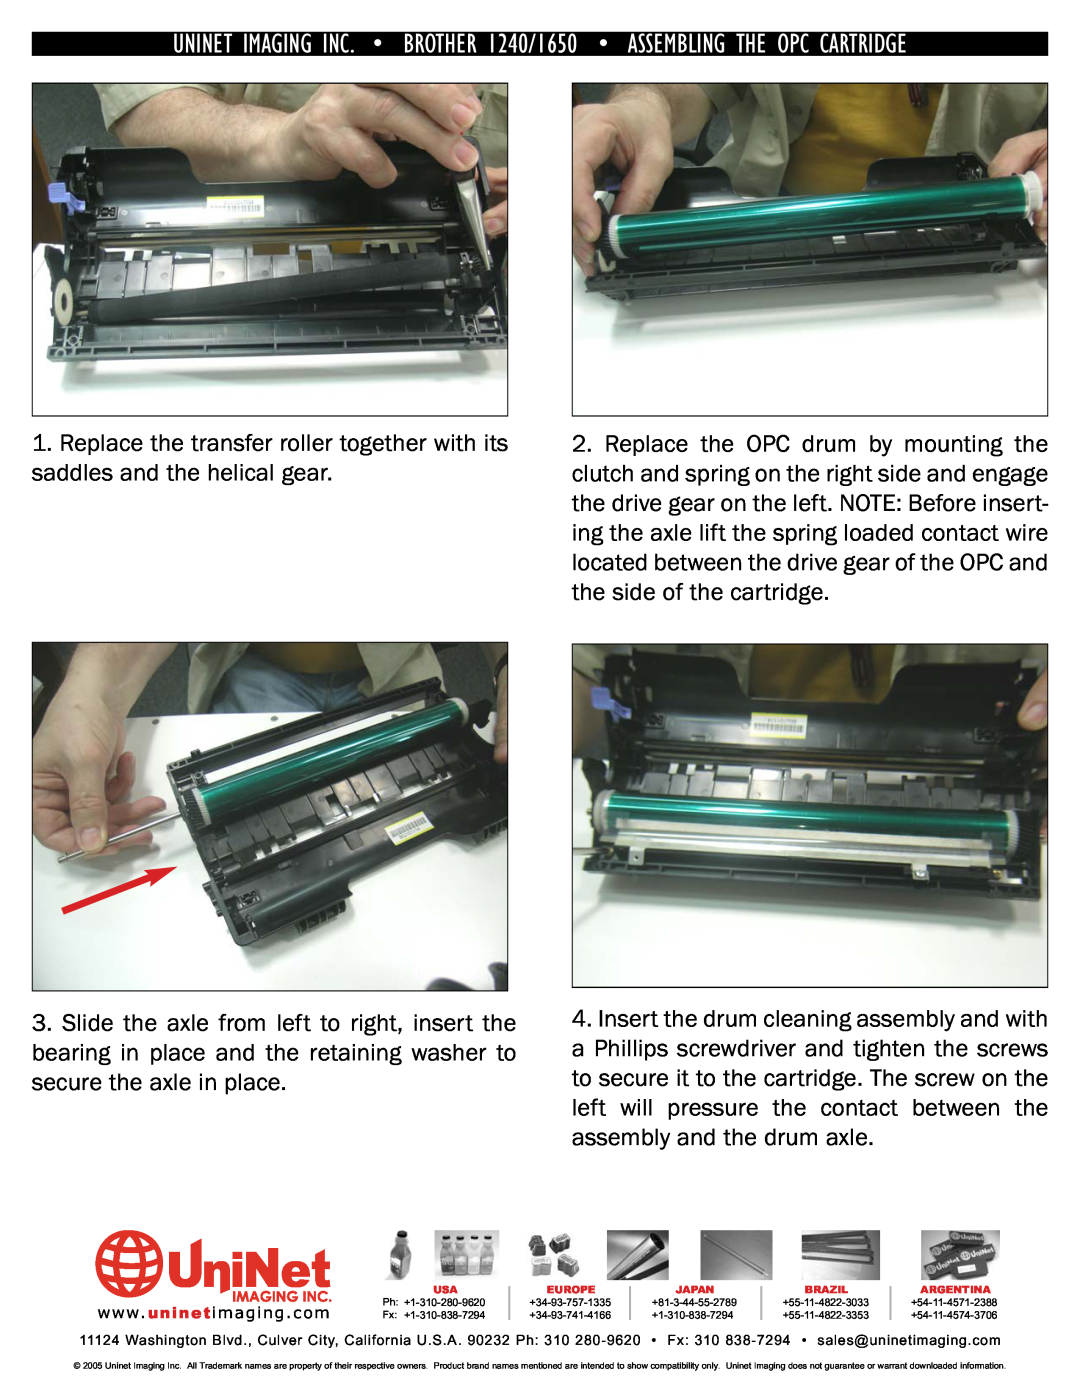 Brother manual UNINET IMAGING INC. BROTHER 1240/1650 ASSEMBLING THE OPC CARTRIDGE 